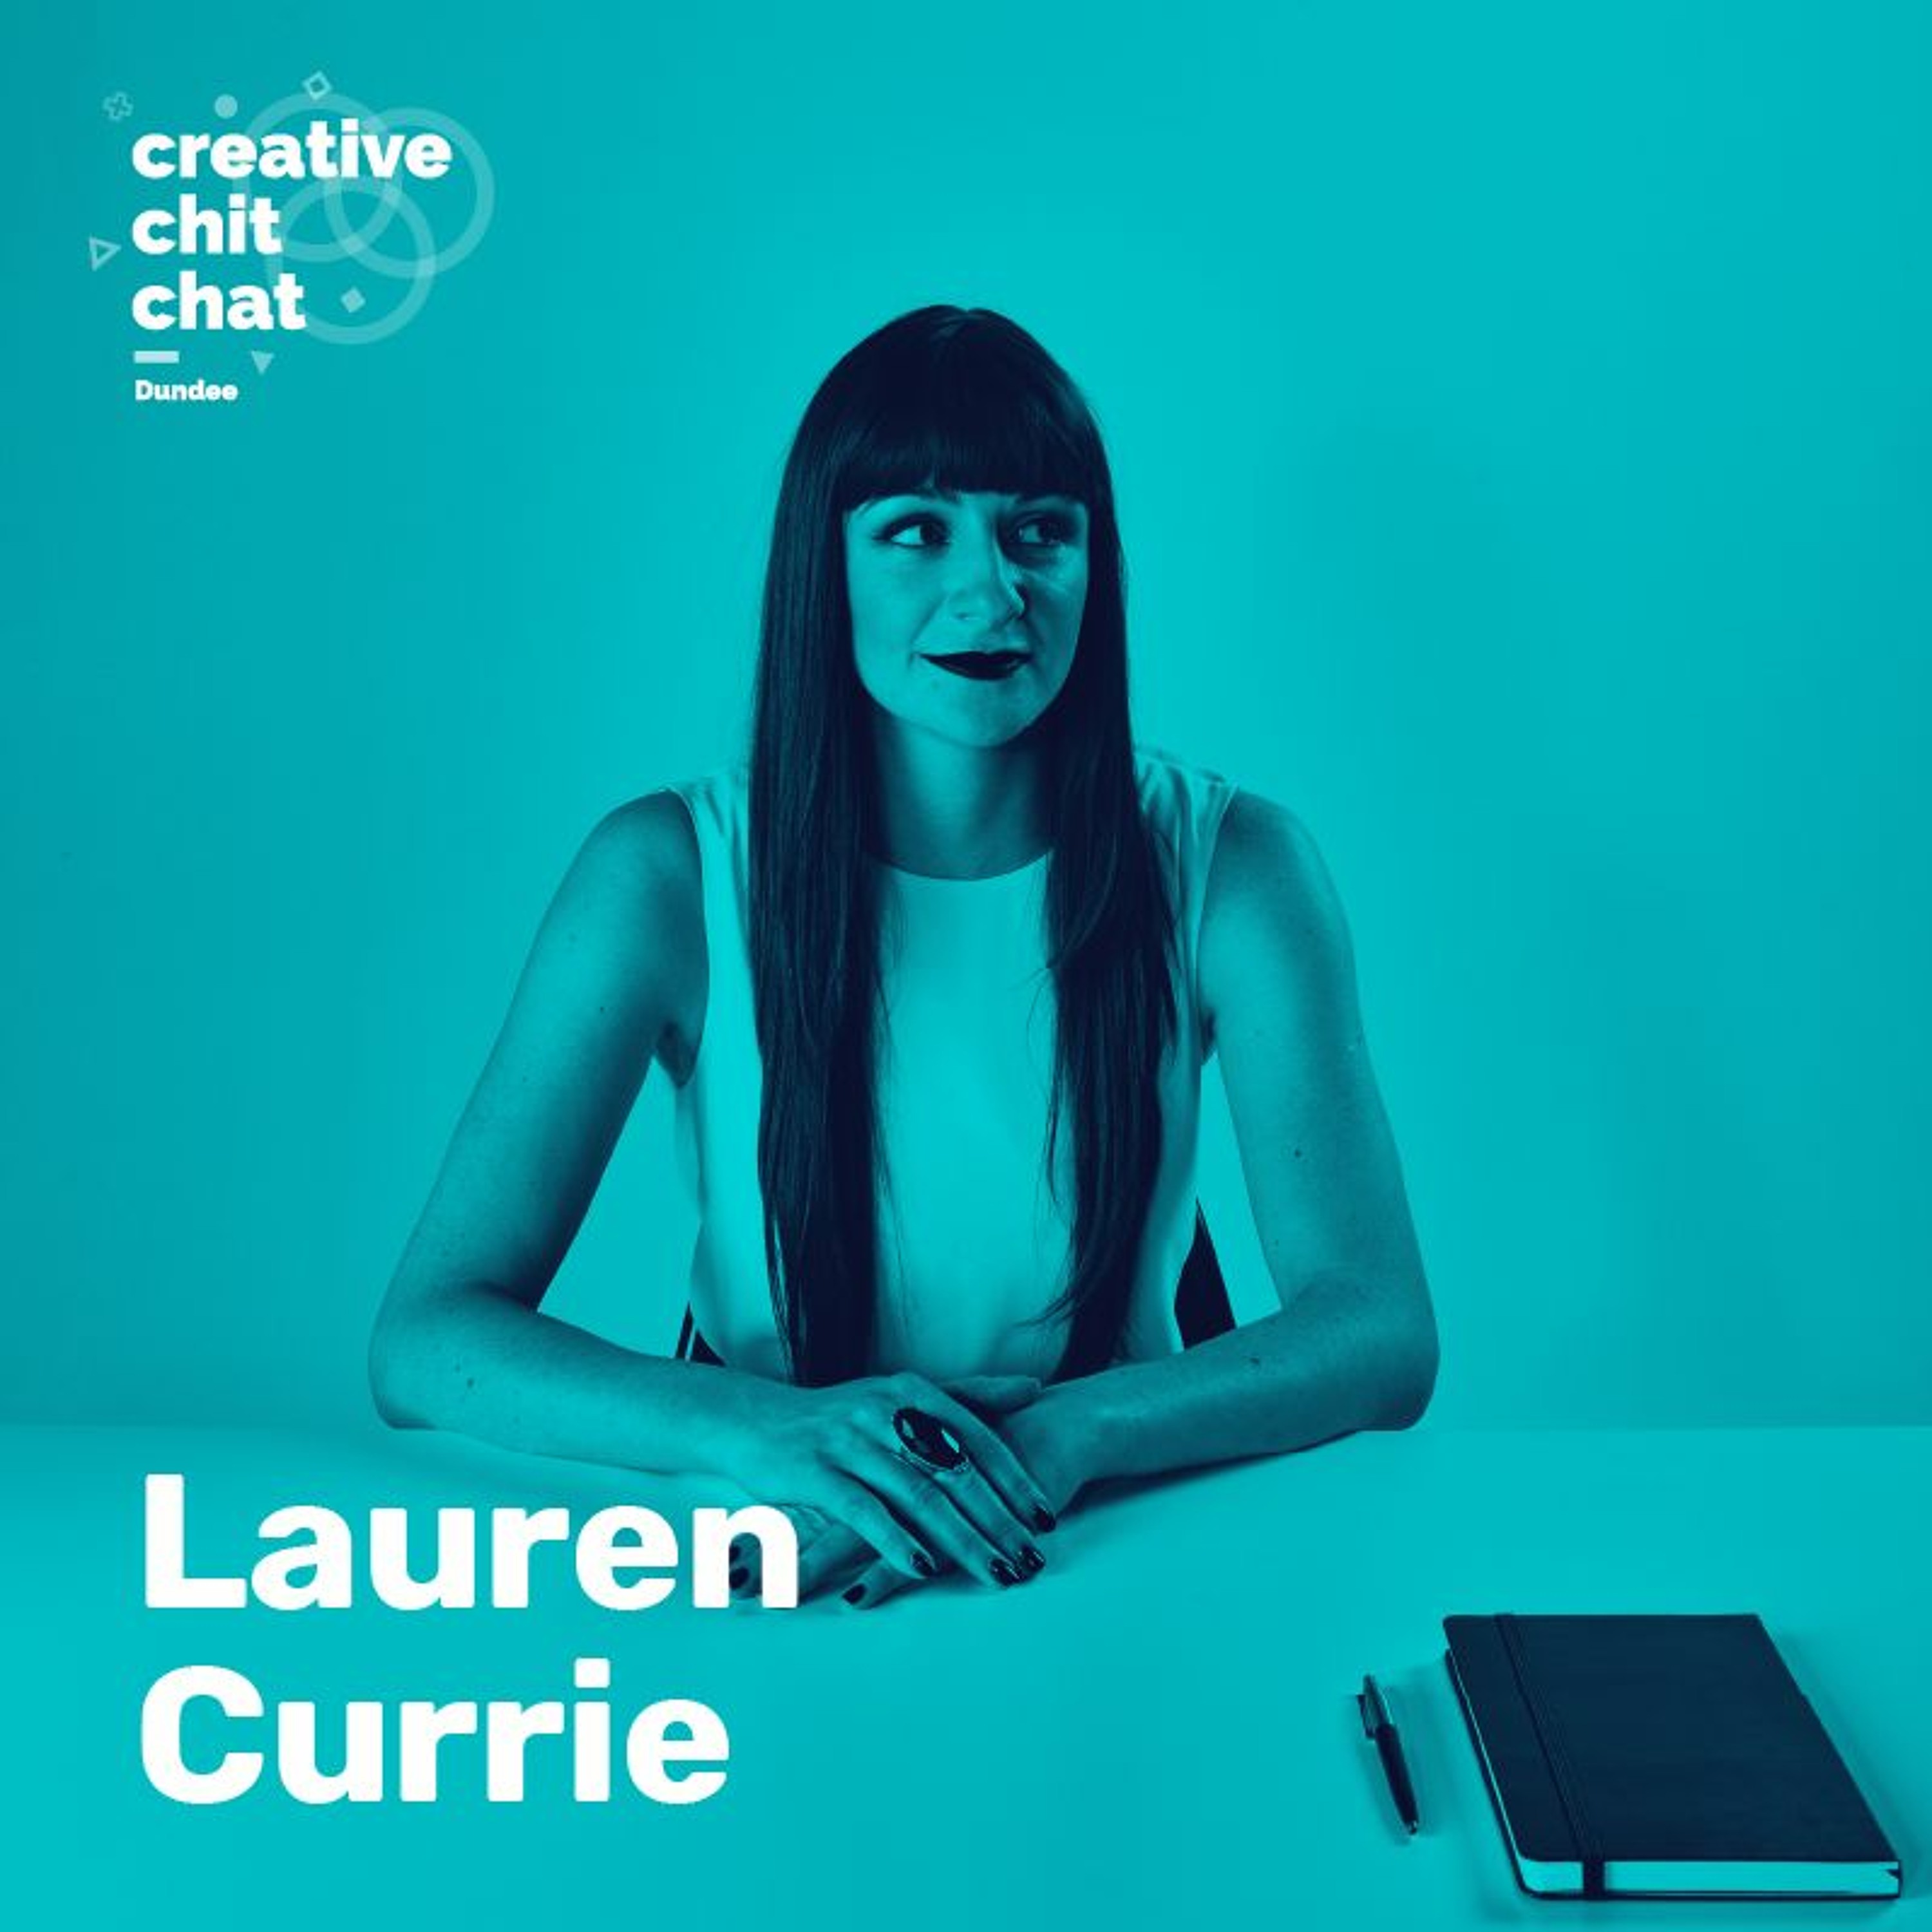 Lauren Currie - Service design and creating positive change